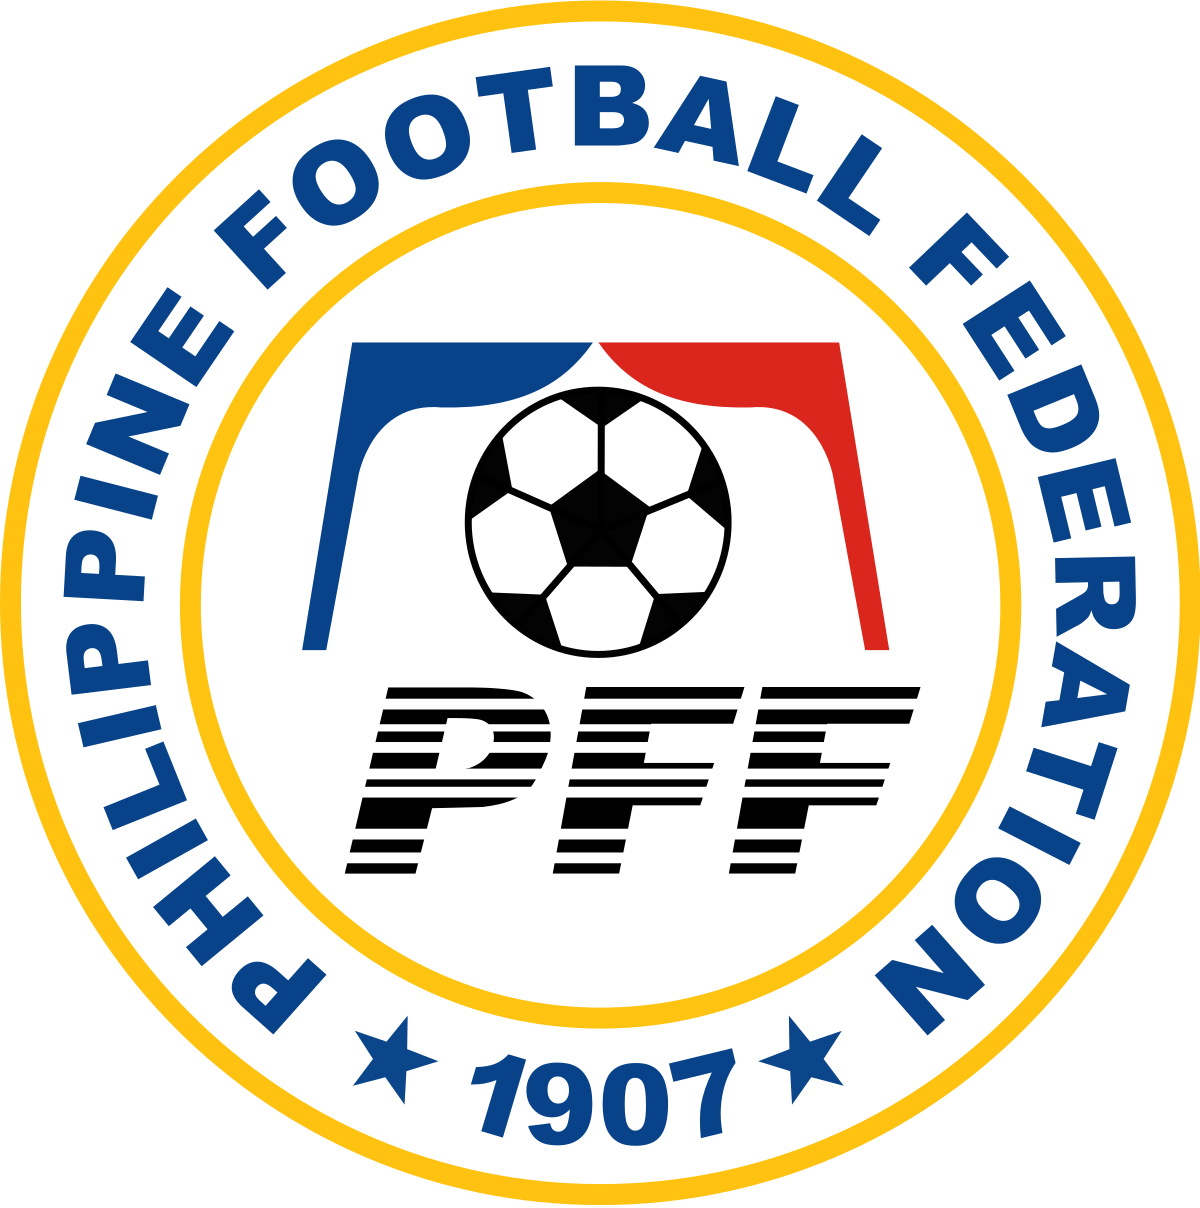 Red White and Blue Eagles Football Logo - Philippines national football team